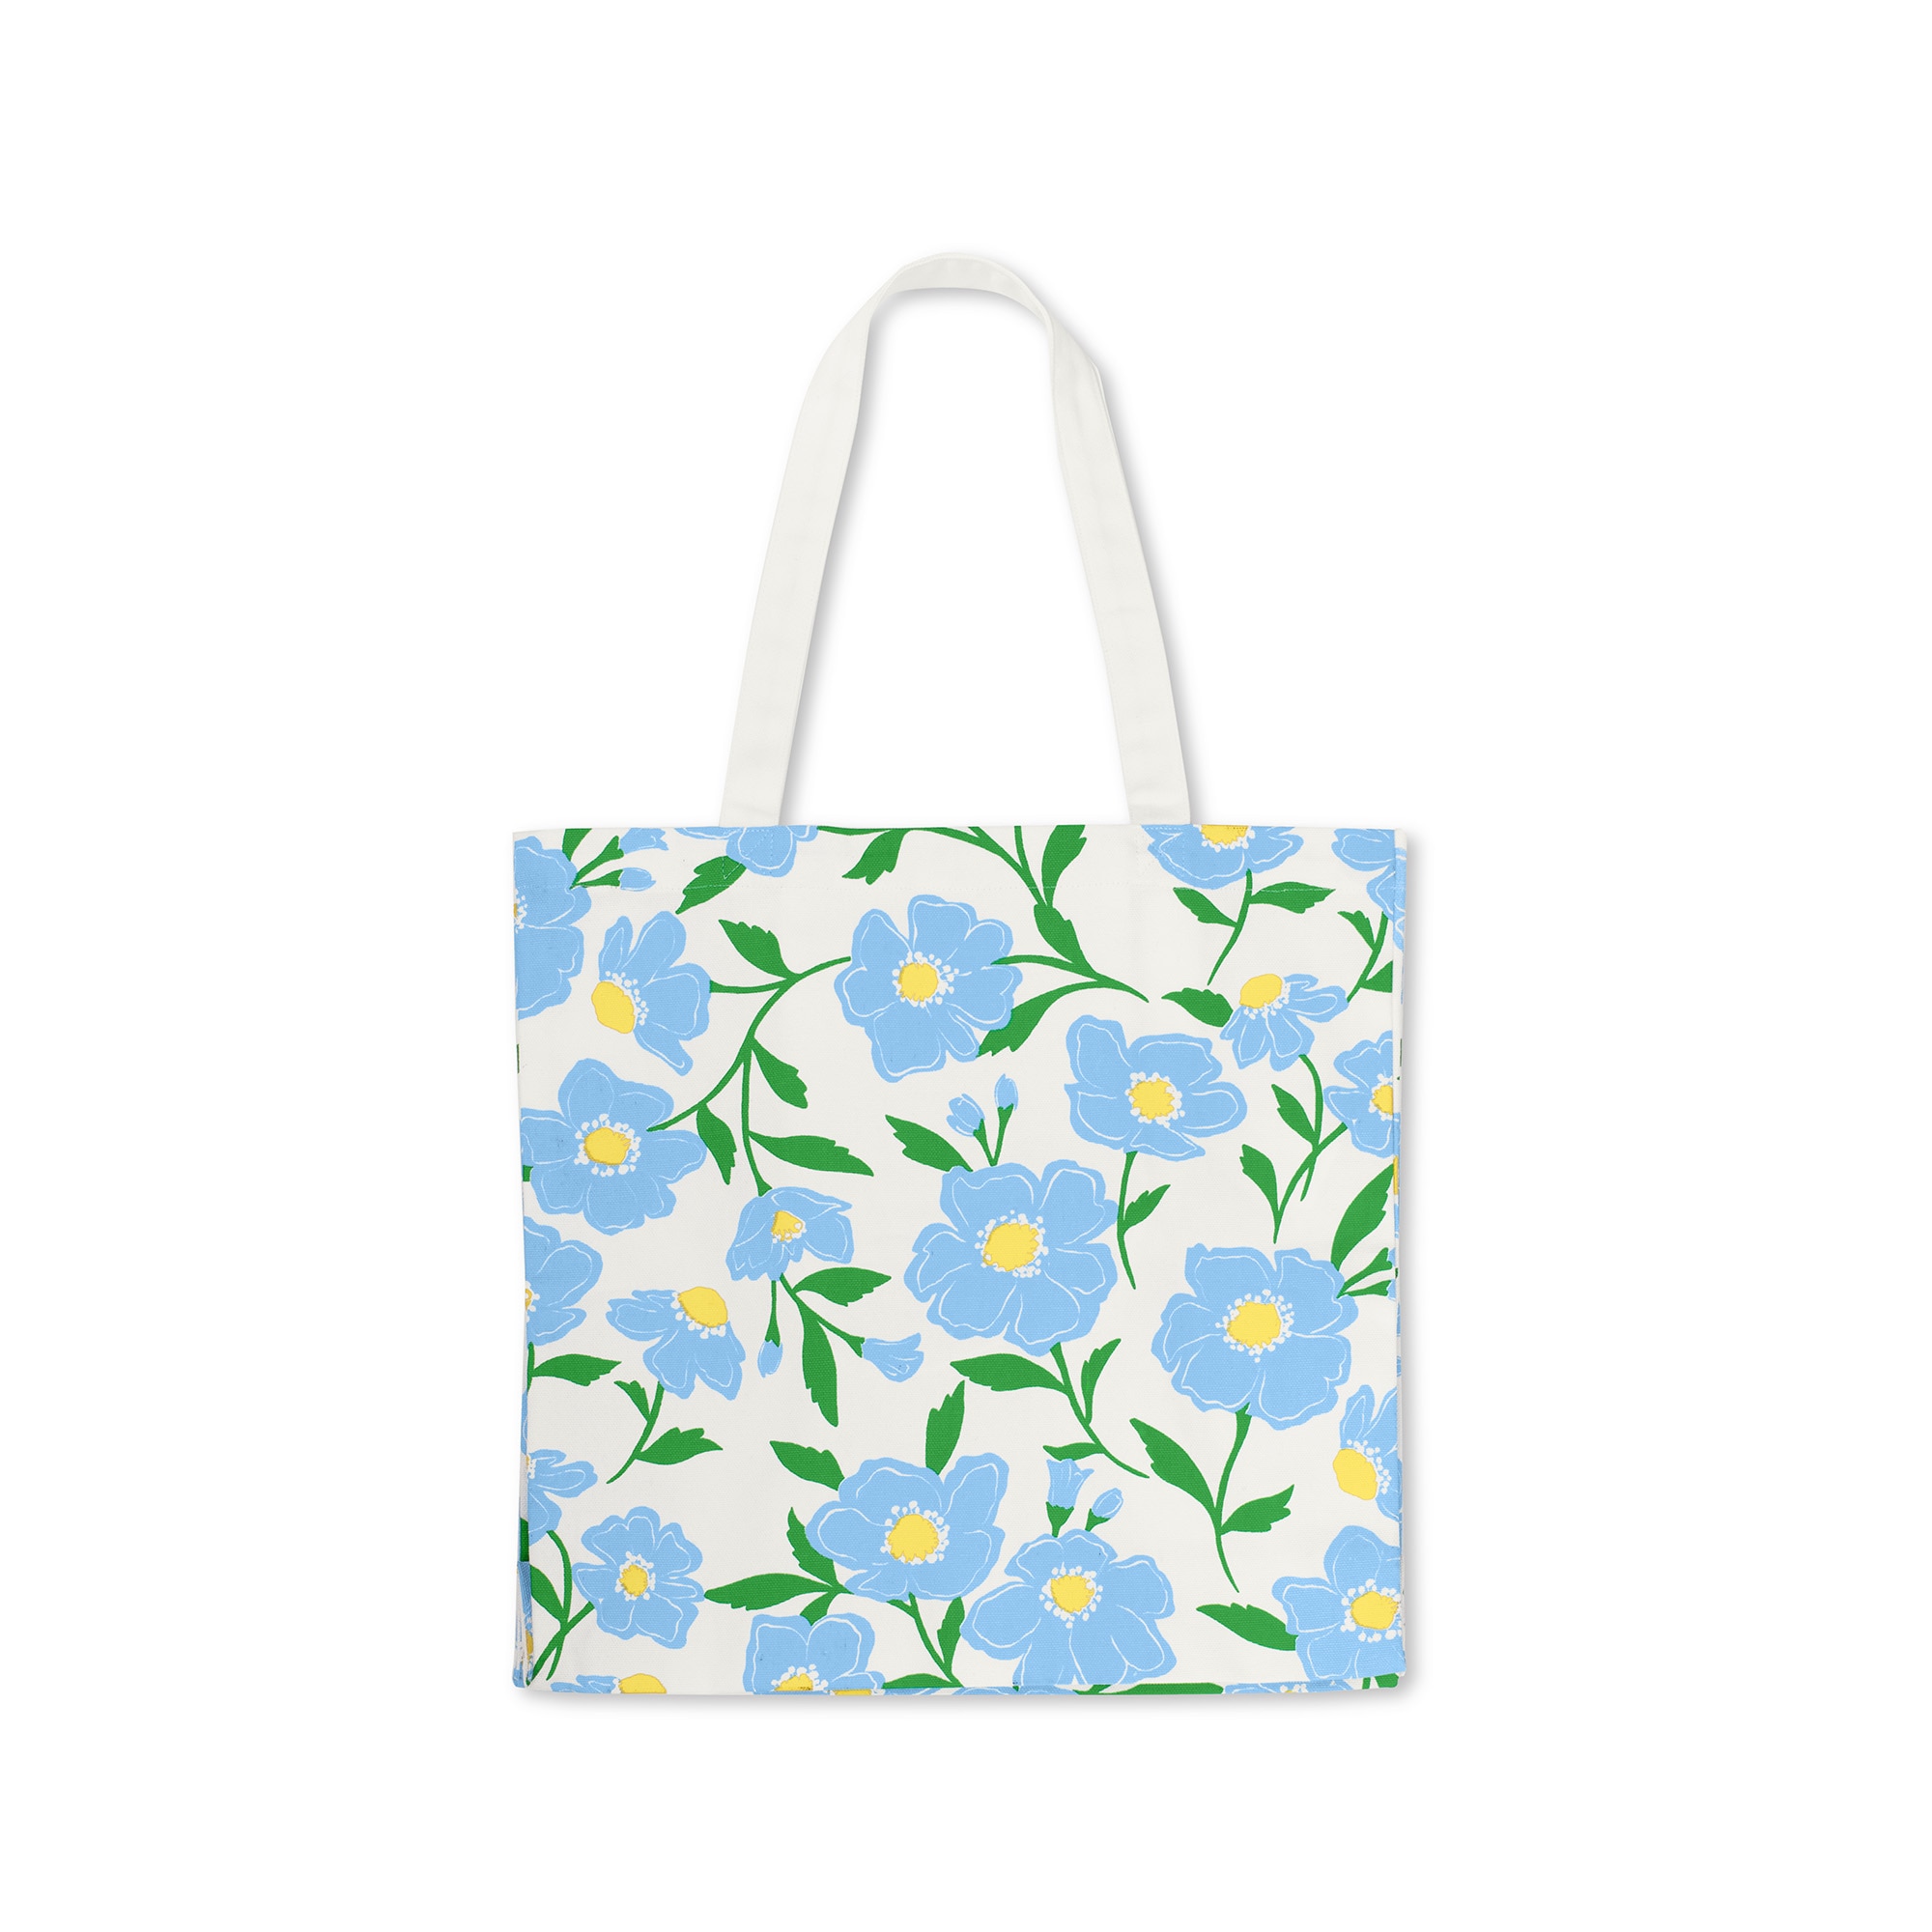 Kate Spade New York Canvas Book Tote Sunshine Floral